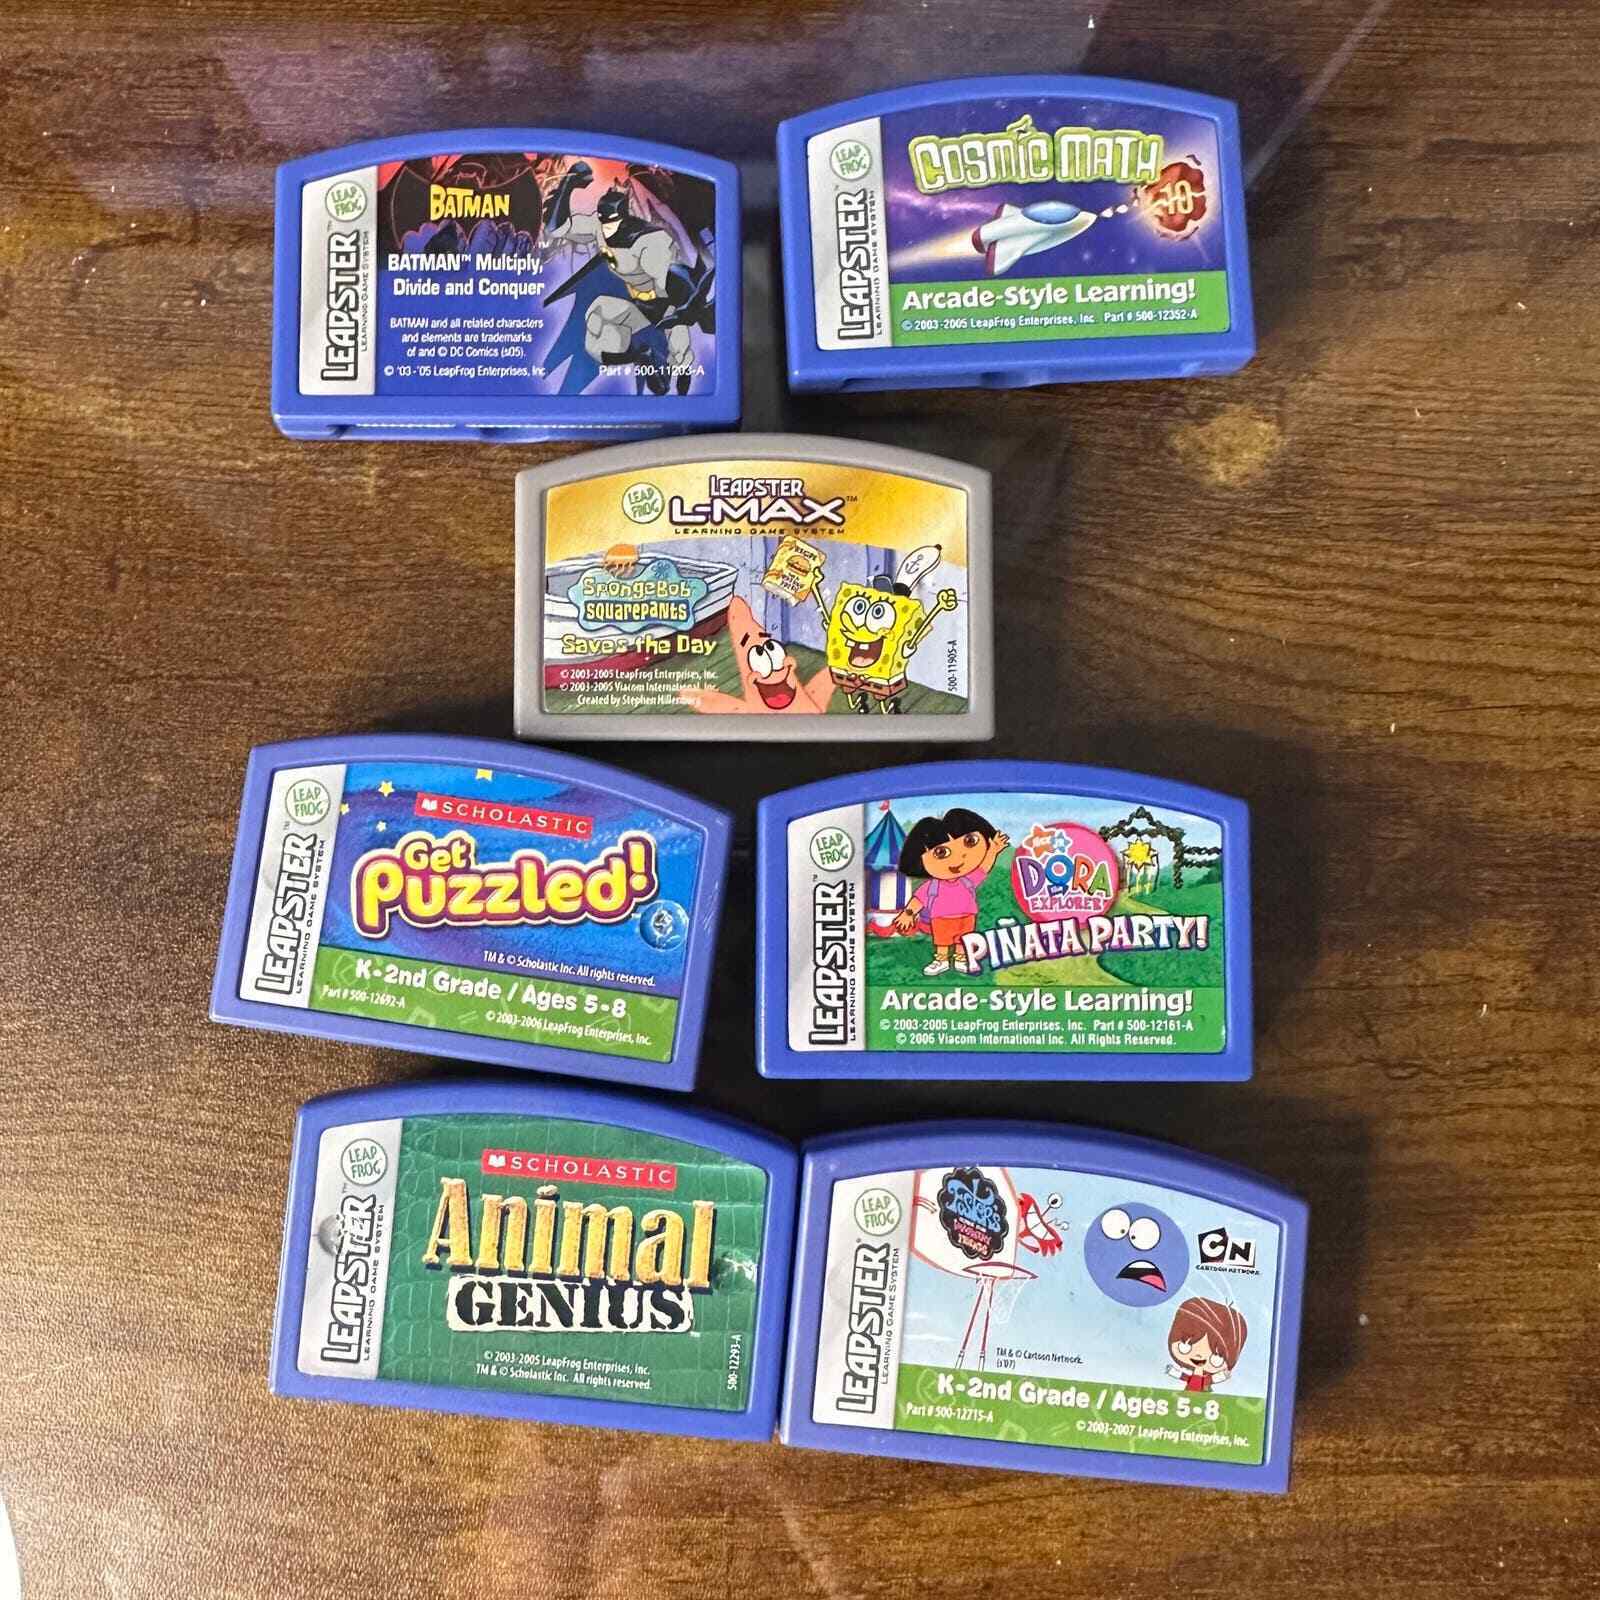  LEAPSTER LEAP FROG LOT OF 7 ELECTRONIC LEARNING GAME CARTRIDGES 4-8 YEAR, K-2ND